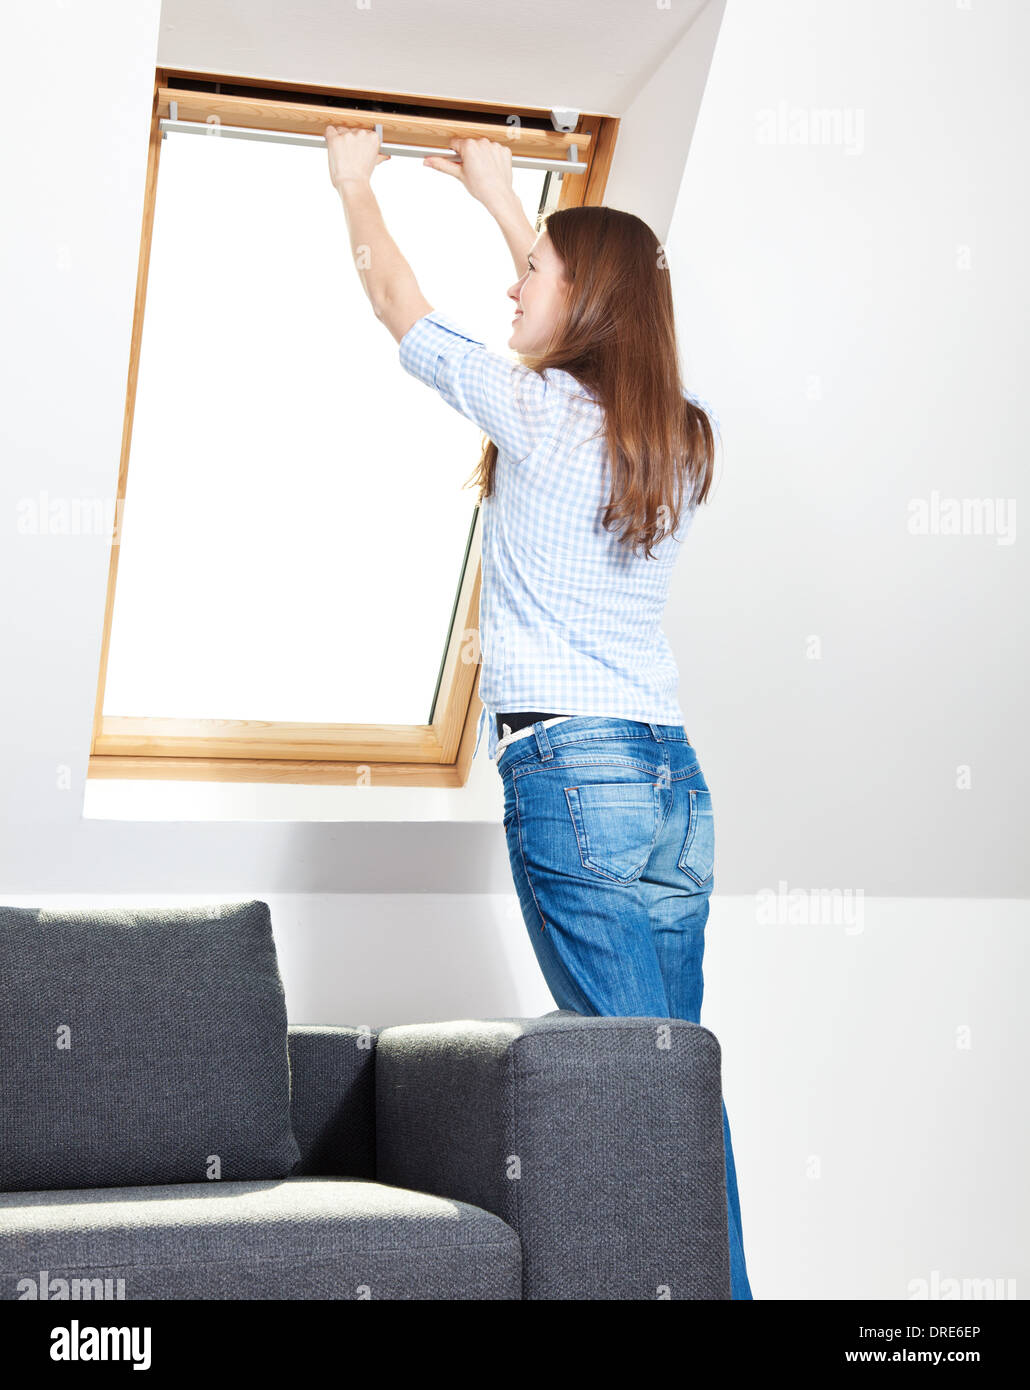 Young woman opens window at home Stock Photo